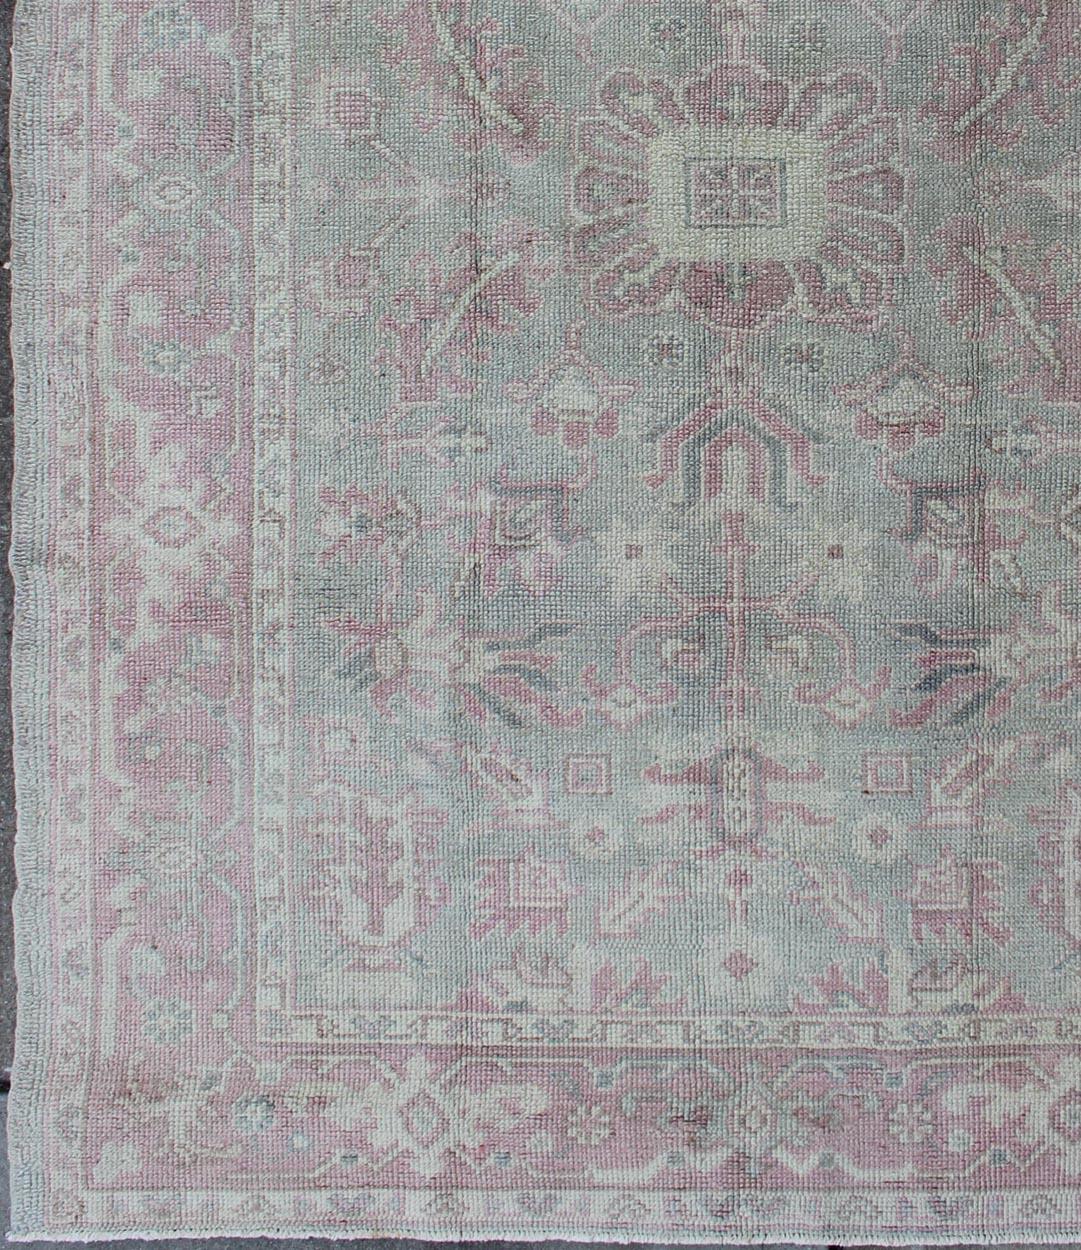 Antique Turkish Oushak carpet with geometric designs, rug en-165872, country of origin / type: Turkey / Oushak, circa 1930

This Oushak rug from Turkey features a medallion design flanked by geometric designs rendered in a variety of faded color